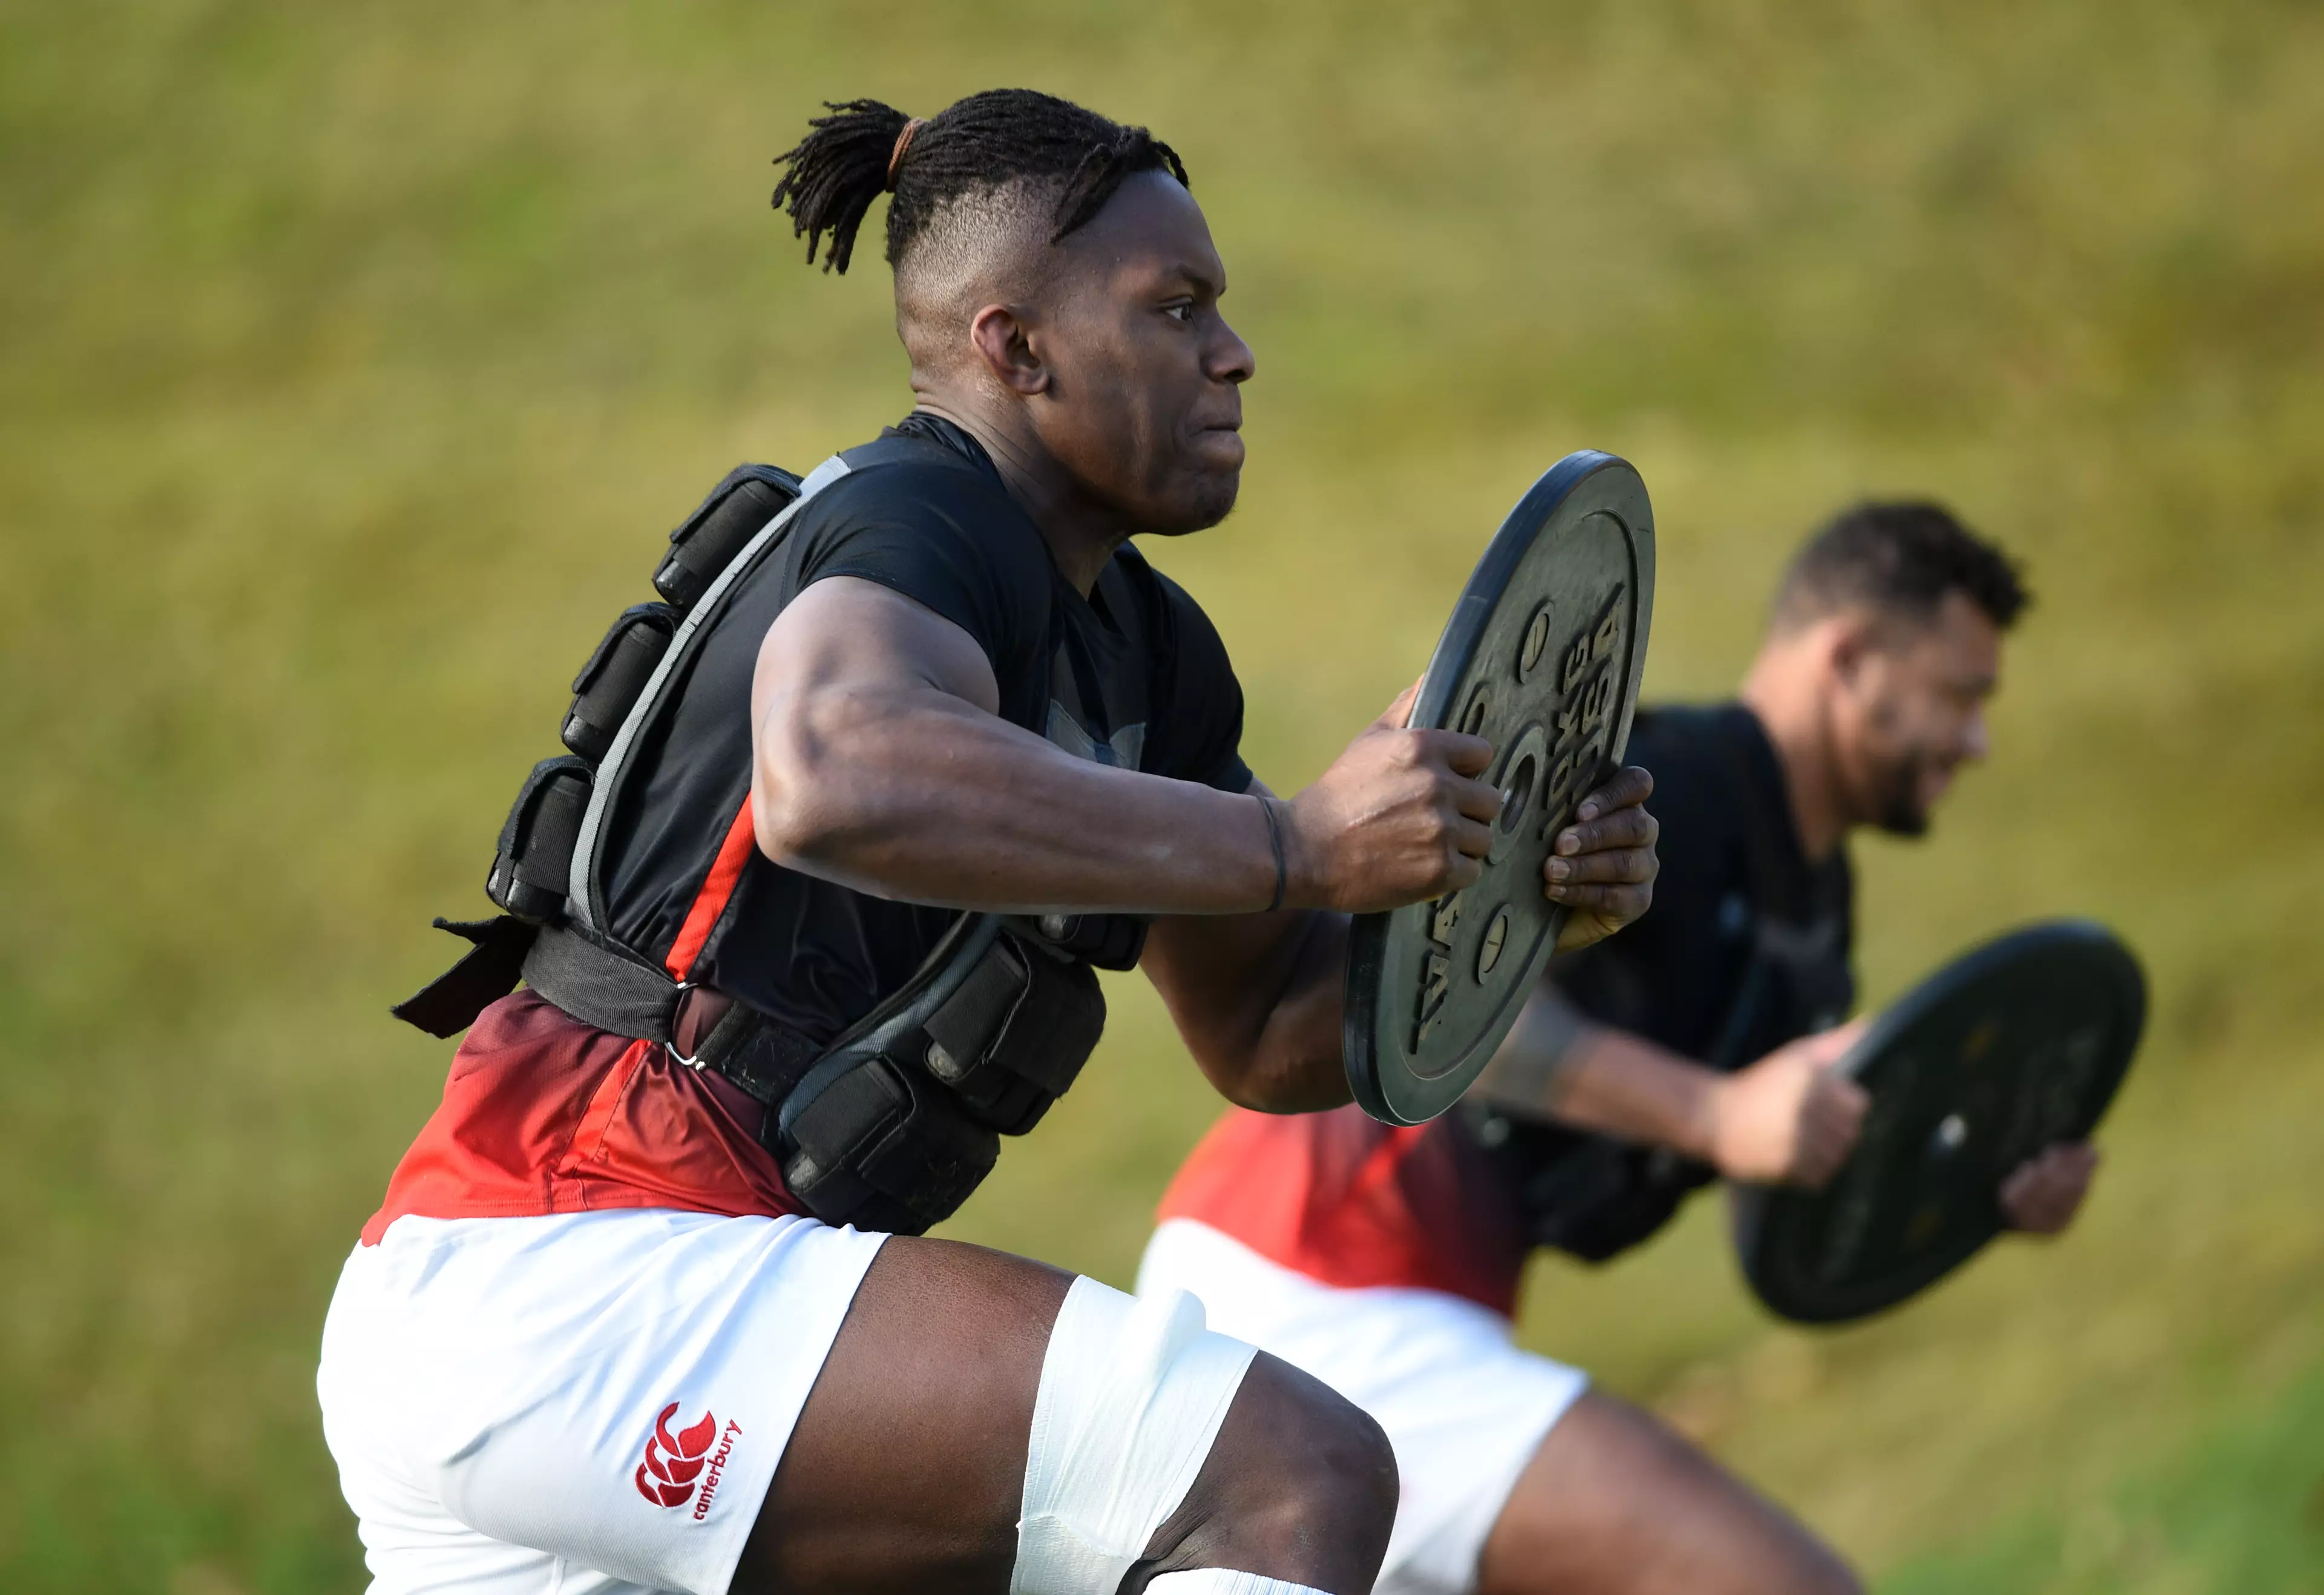 By the time it comes to rugby session in the afternoon, Maro Itoje has normally already trained twice that day